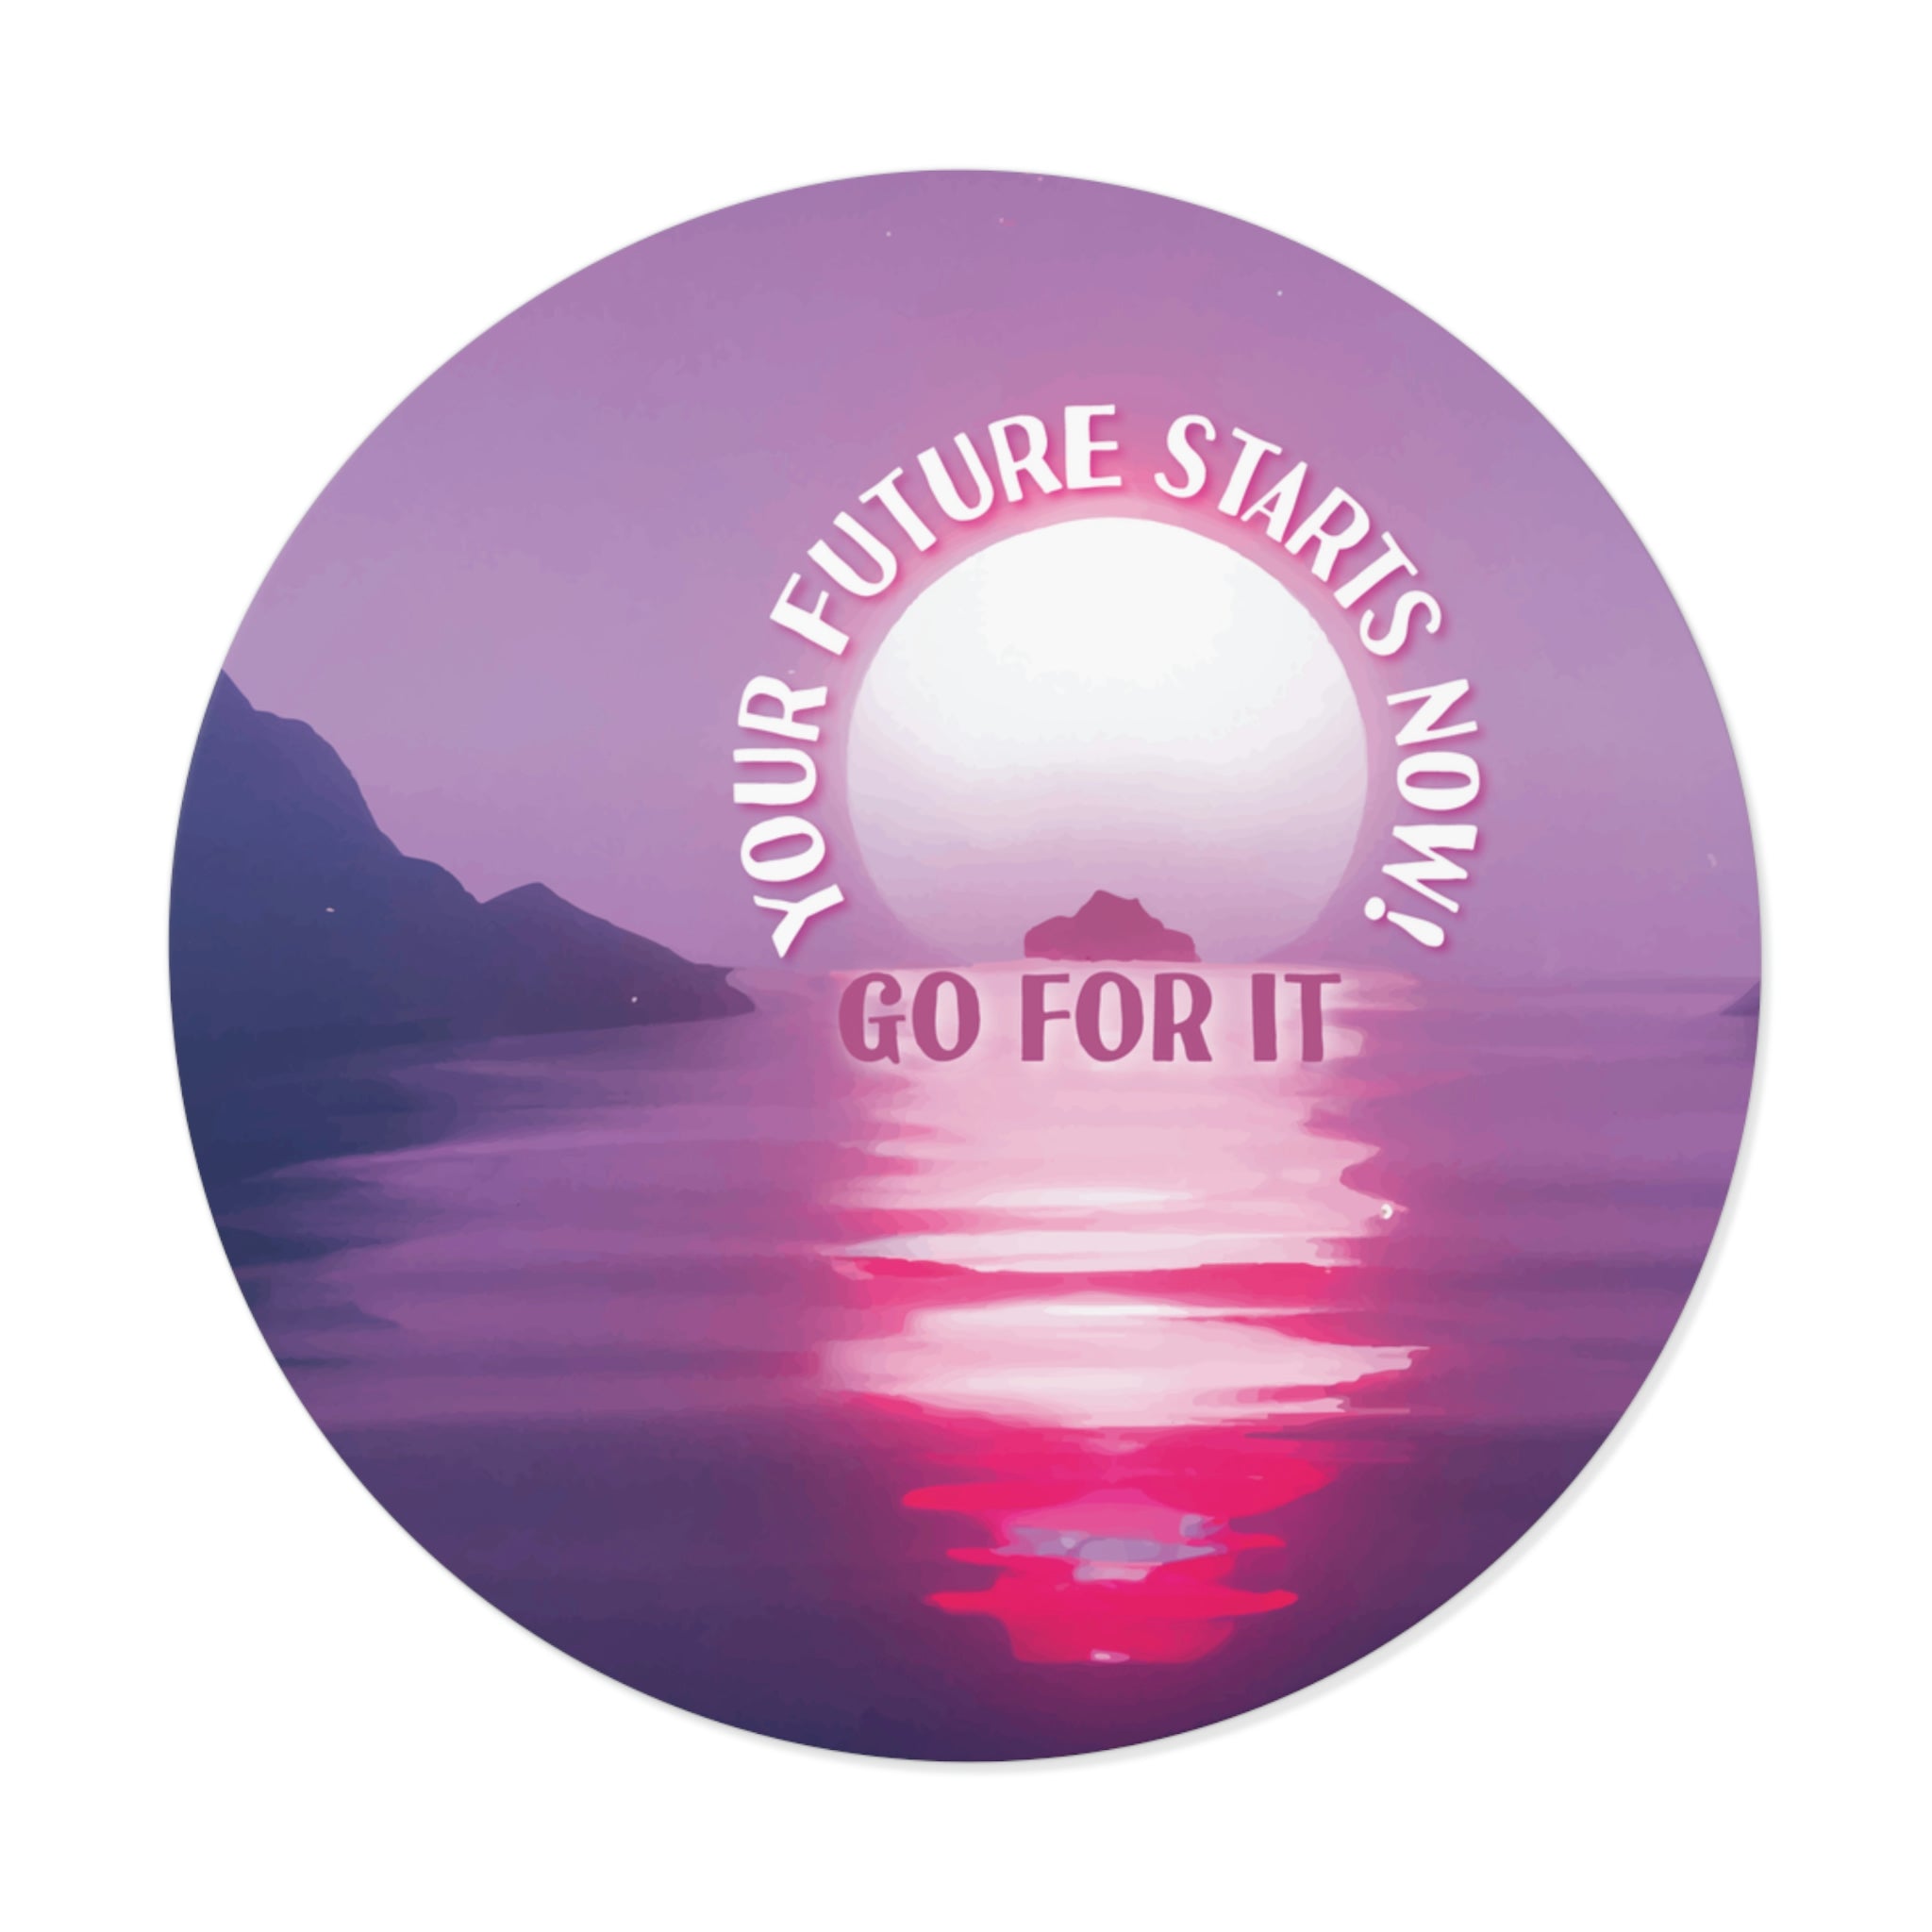 Your Future Starts Now! Buy This Synthwave-Style Round Vinyl Sticker and Go for It! #size_3x3-inches